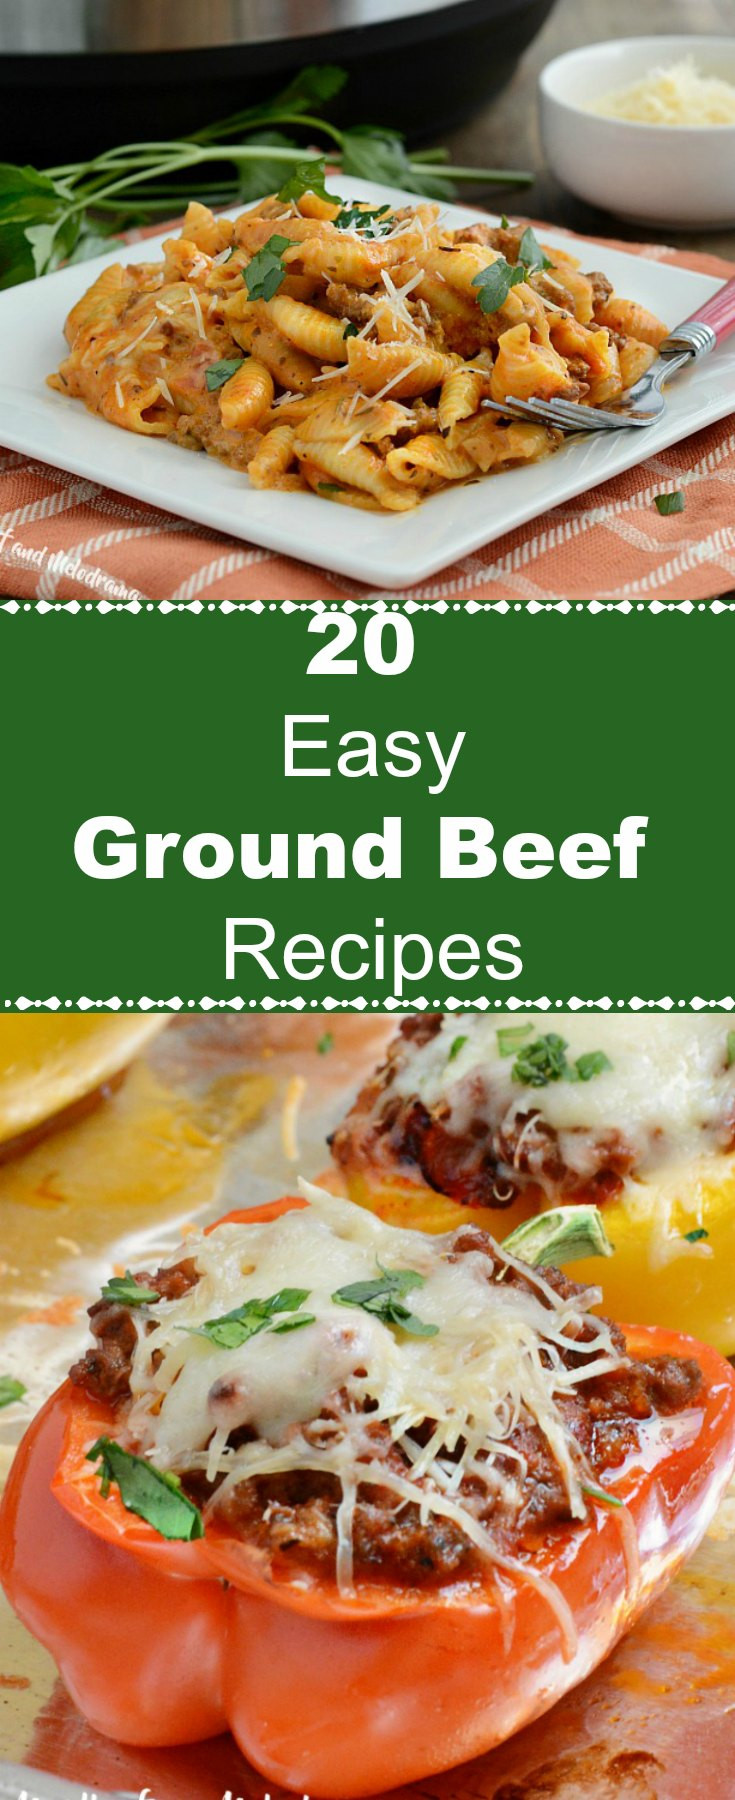 Ground Beef Easy Recipies
 20 Easy Ground Beef Recipes Meatloaf and Melodrama